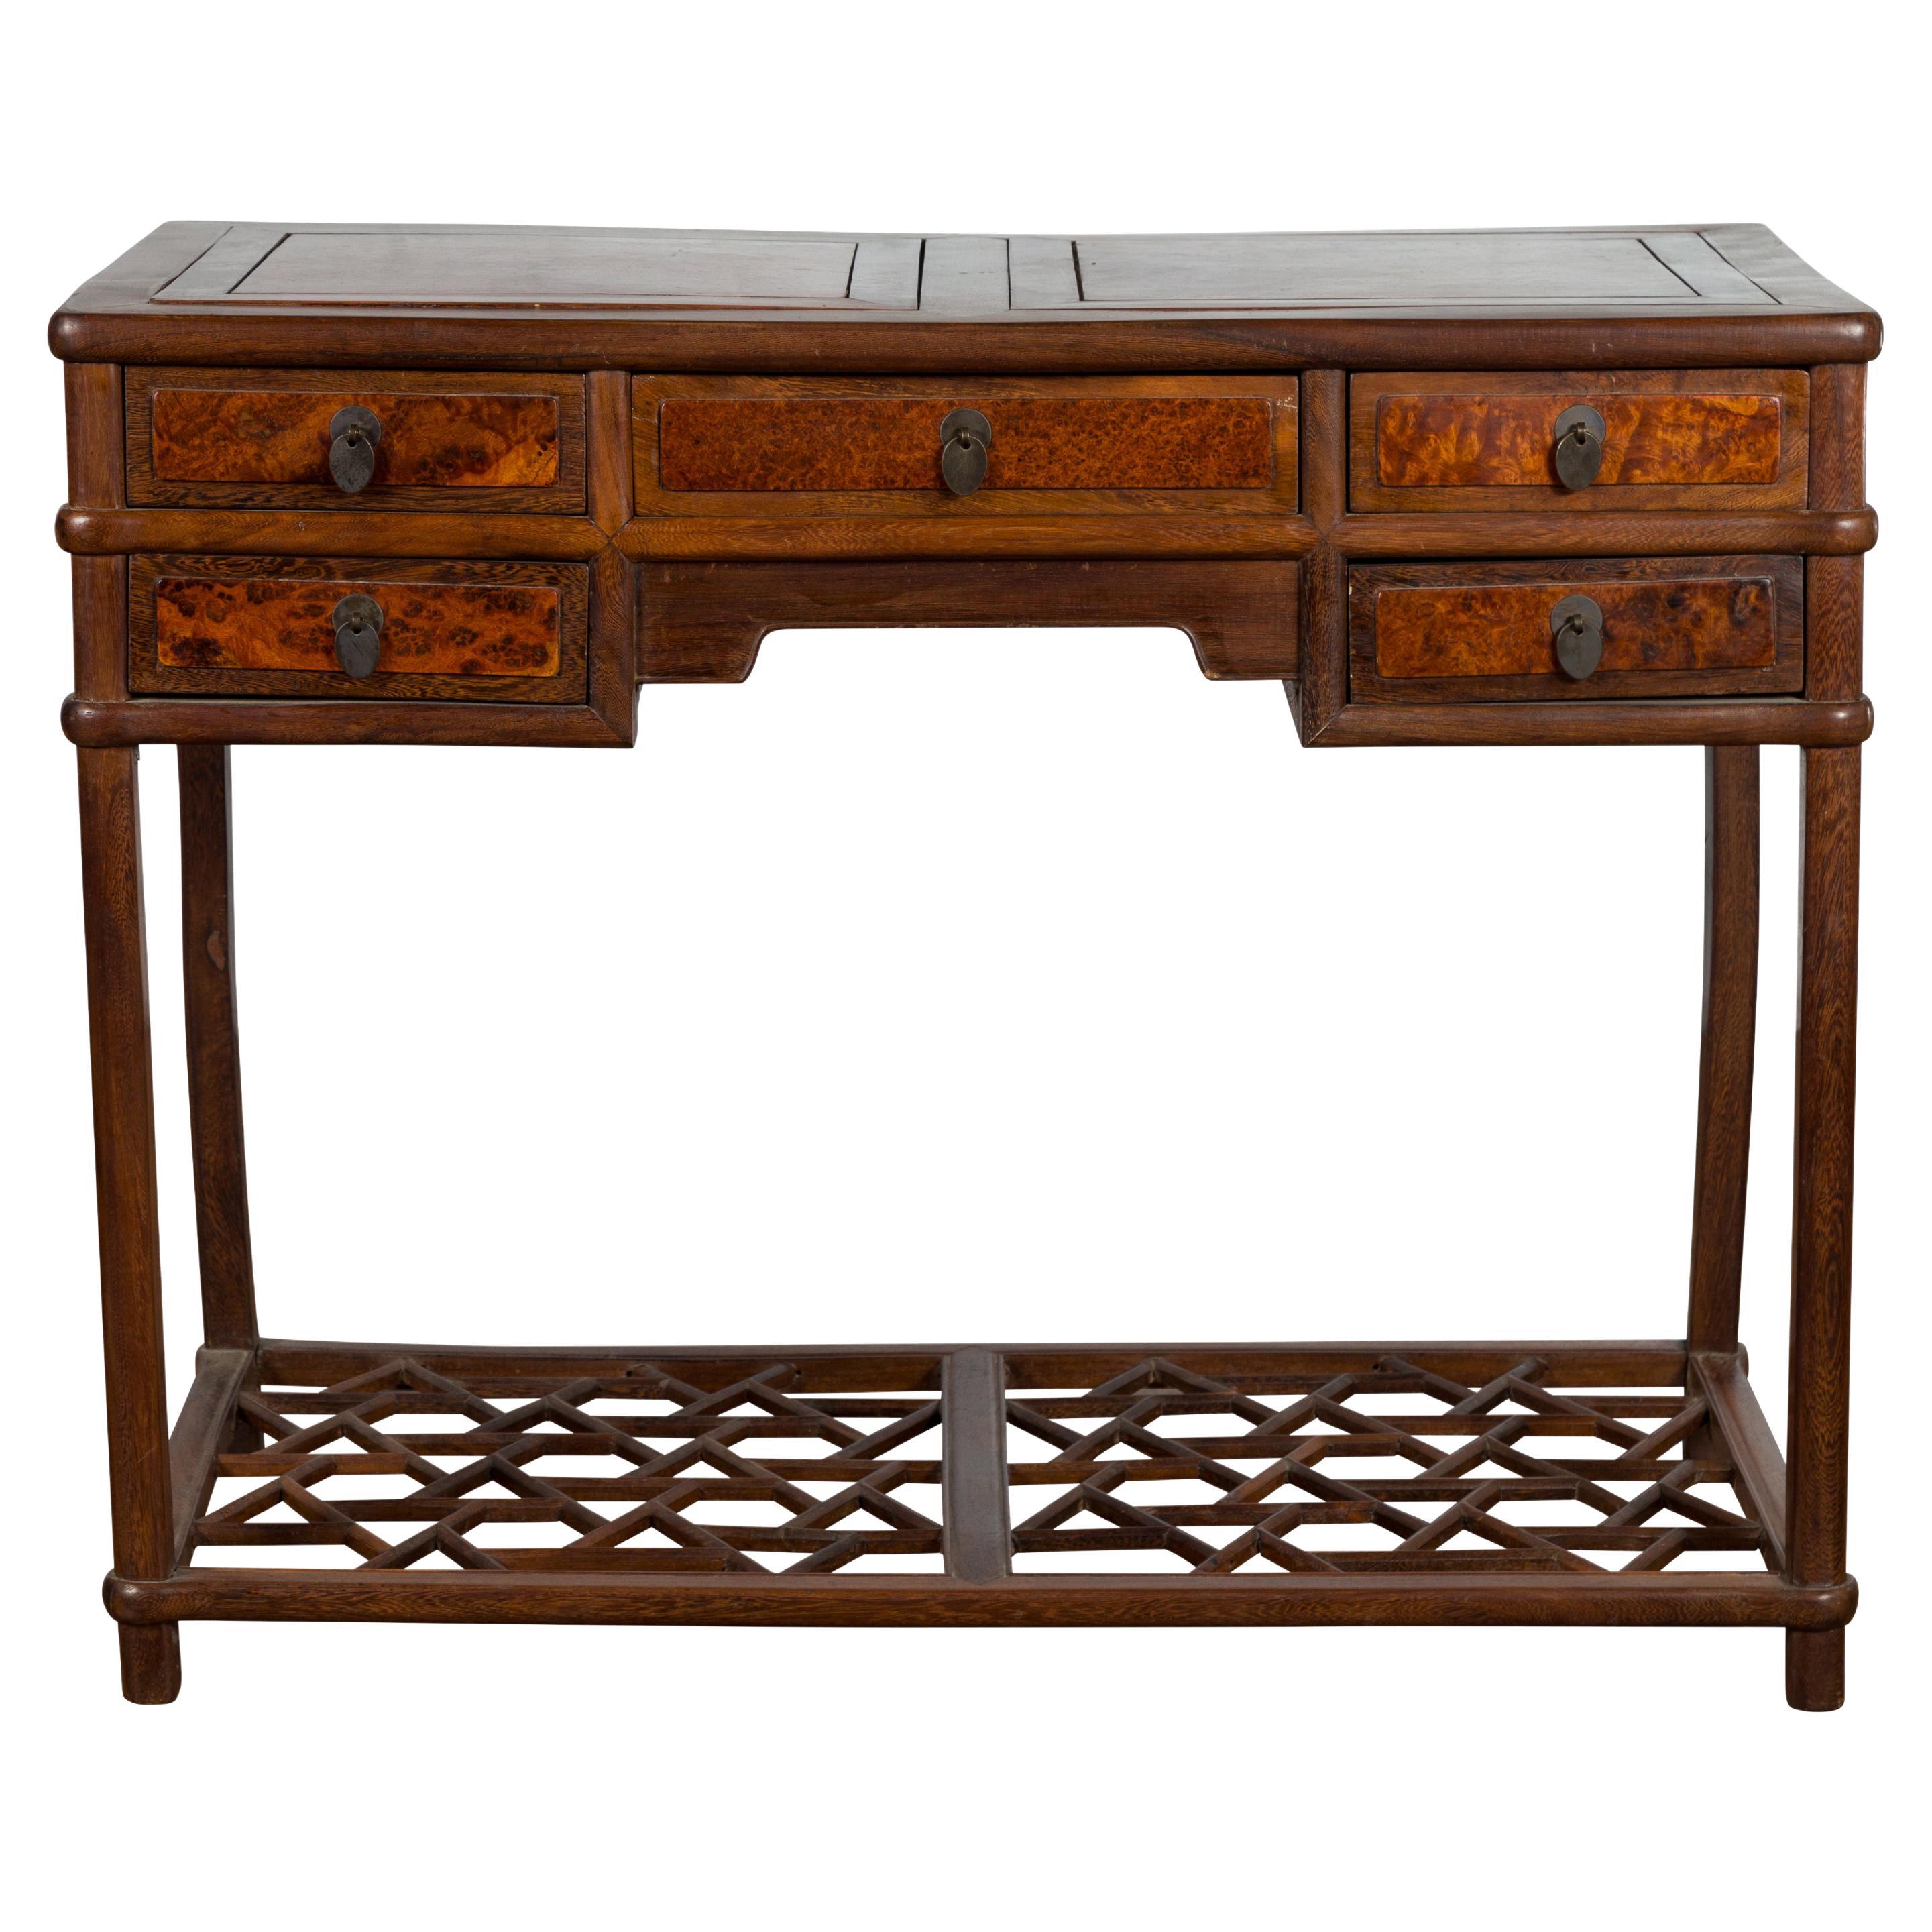 Qing Dynasty 19th Century Desk with Burlwood Top, Drawers and Cracked Ice Shelf